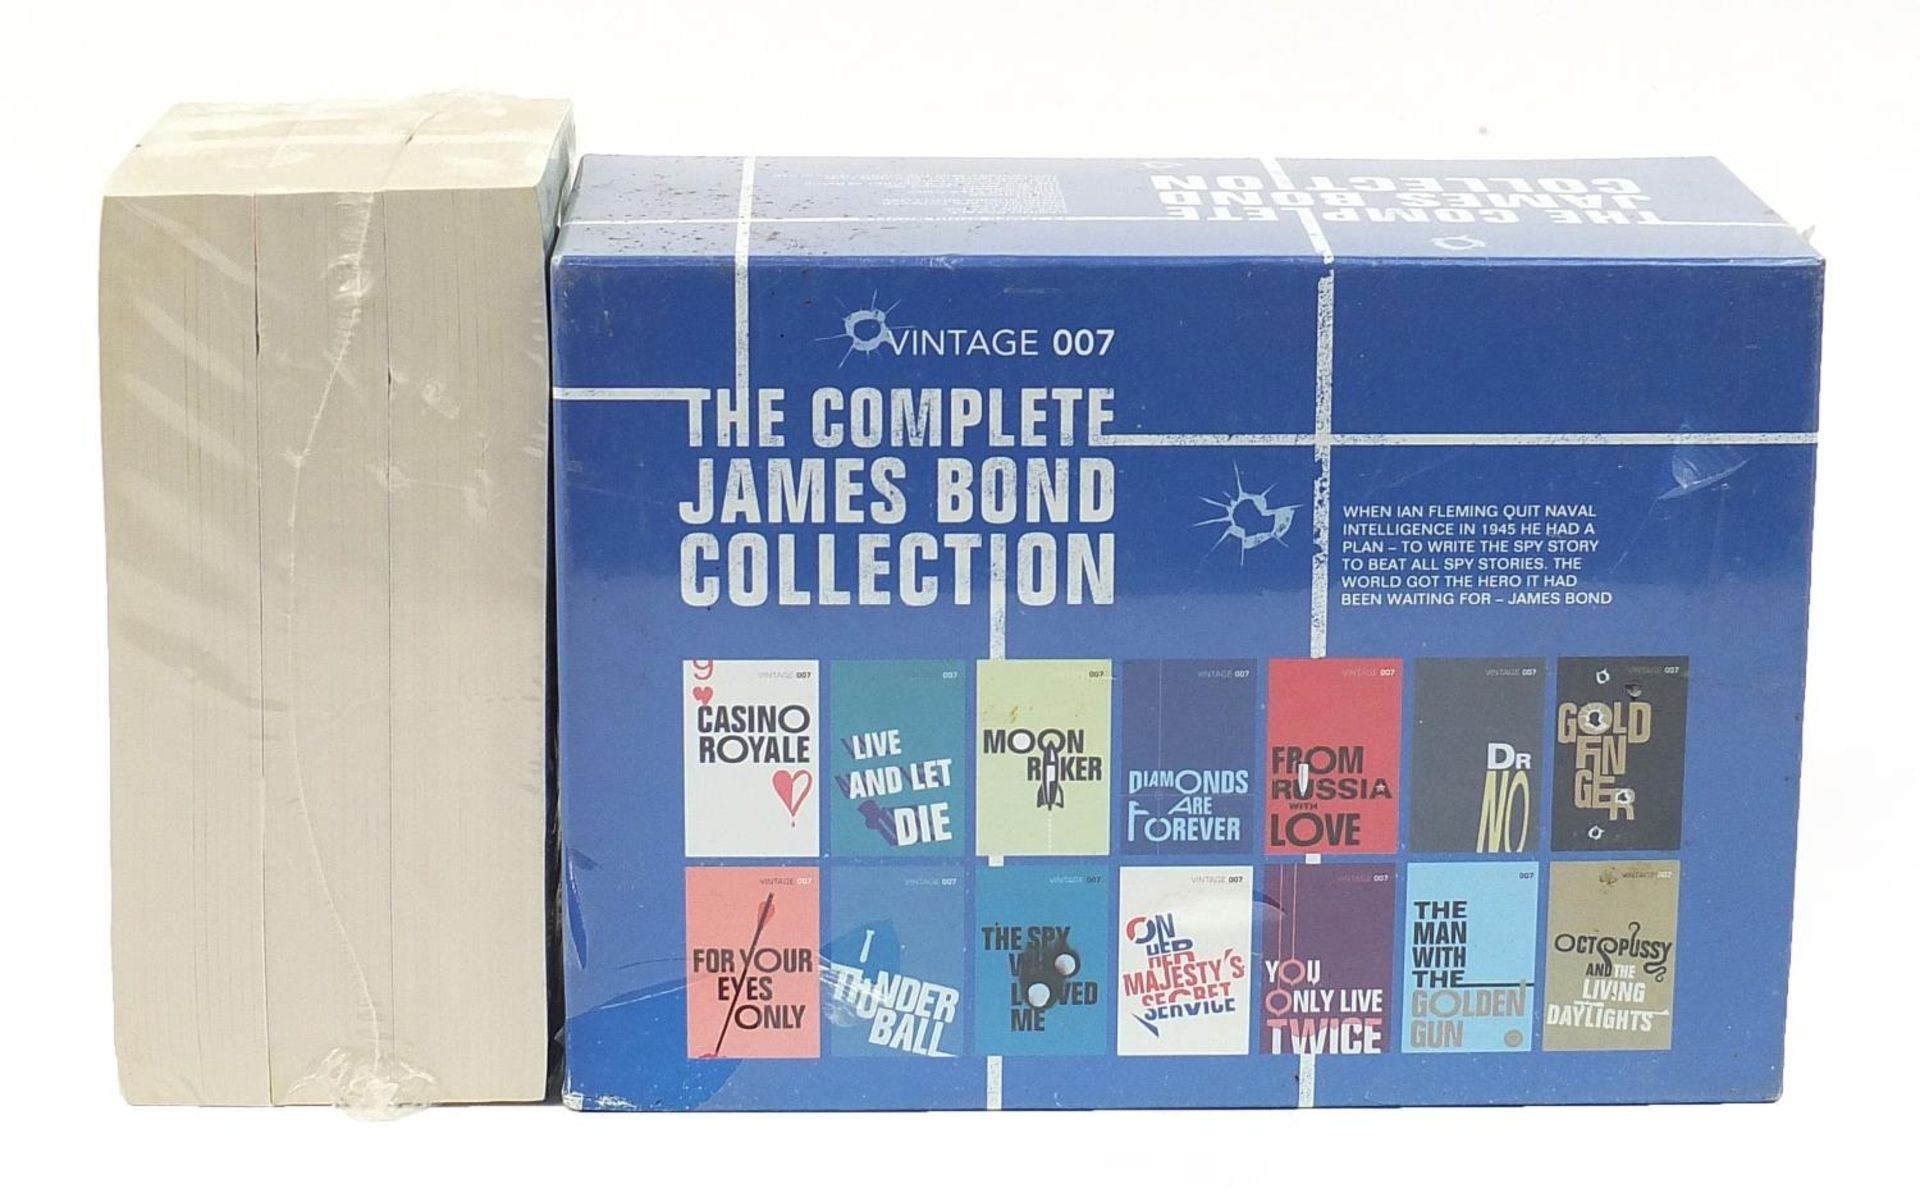 The Complete James Bond Collection and The Lord of the Rings parts 1, 2 and 3 in cellophane wrapping - Image 4 of 4